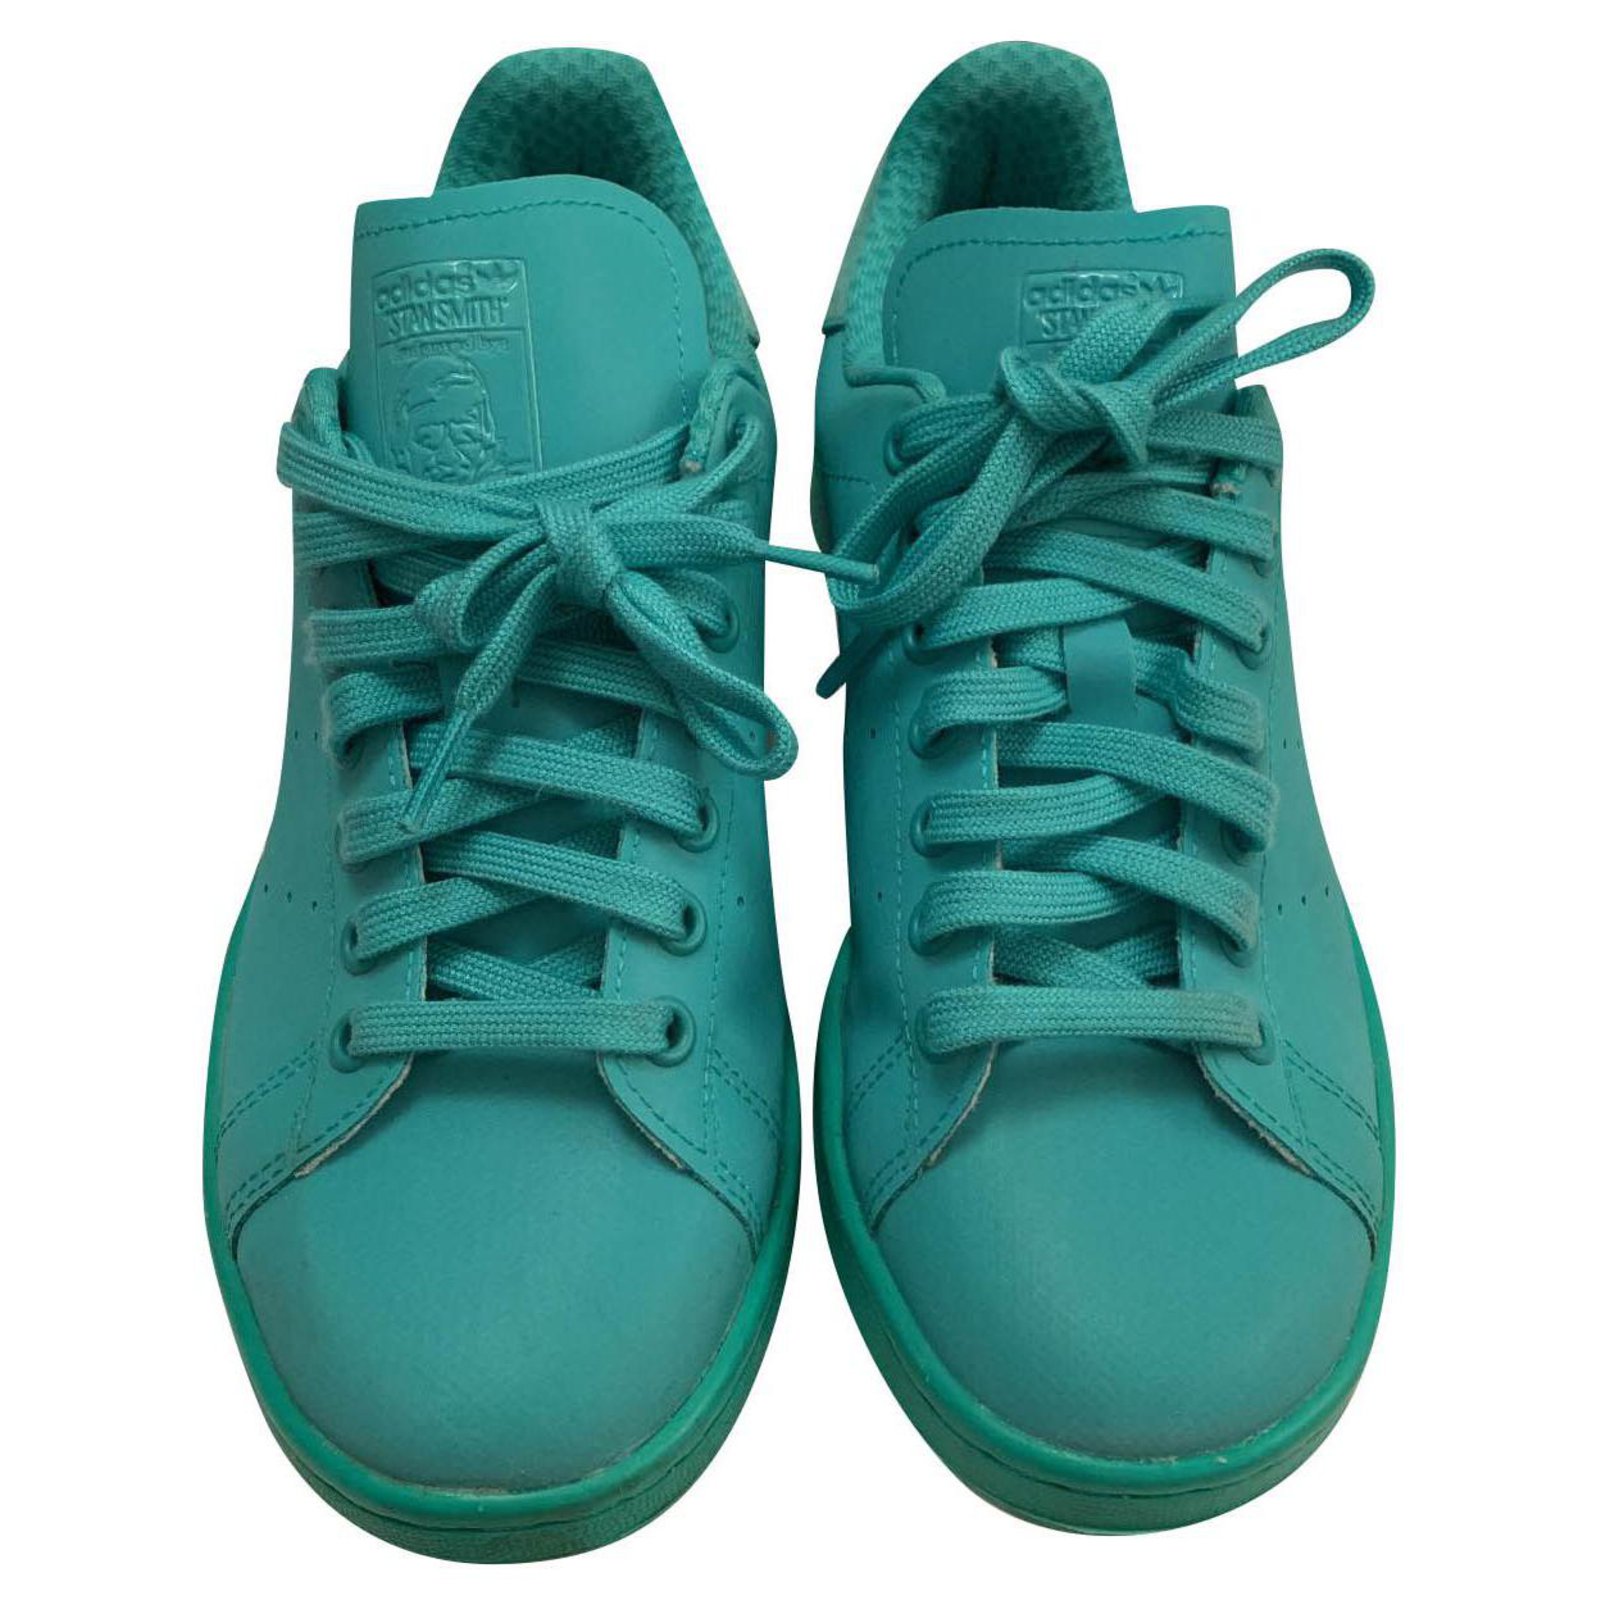 Pair of adidas Stan smith turquoise 39 1/3 كريم واقي الشمس